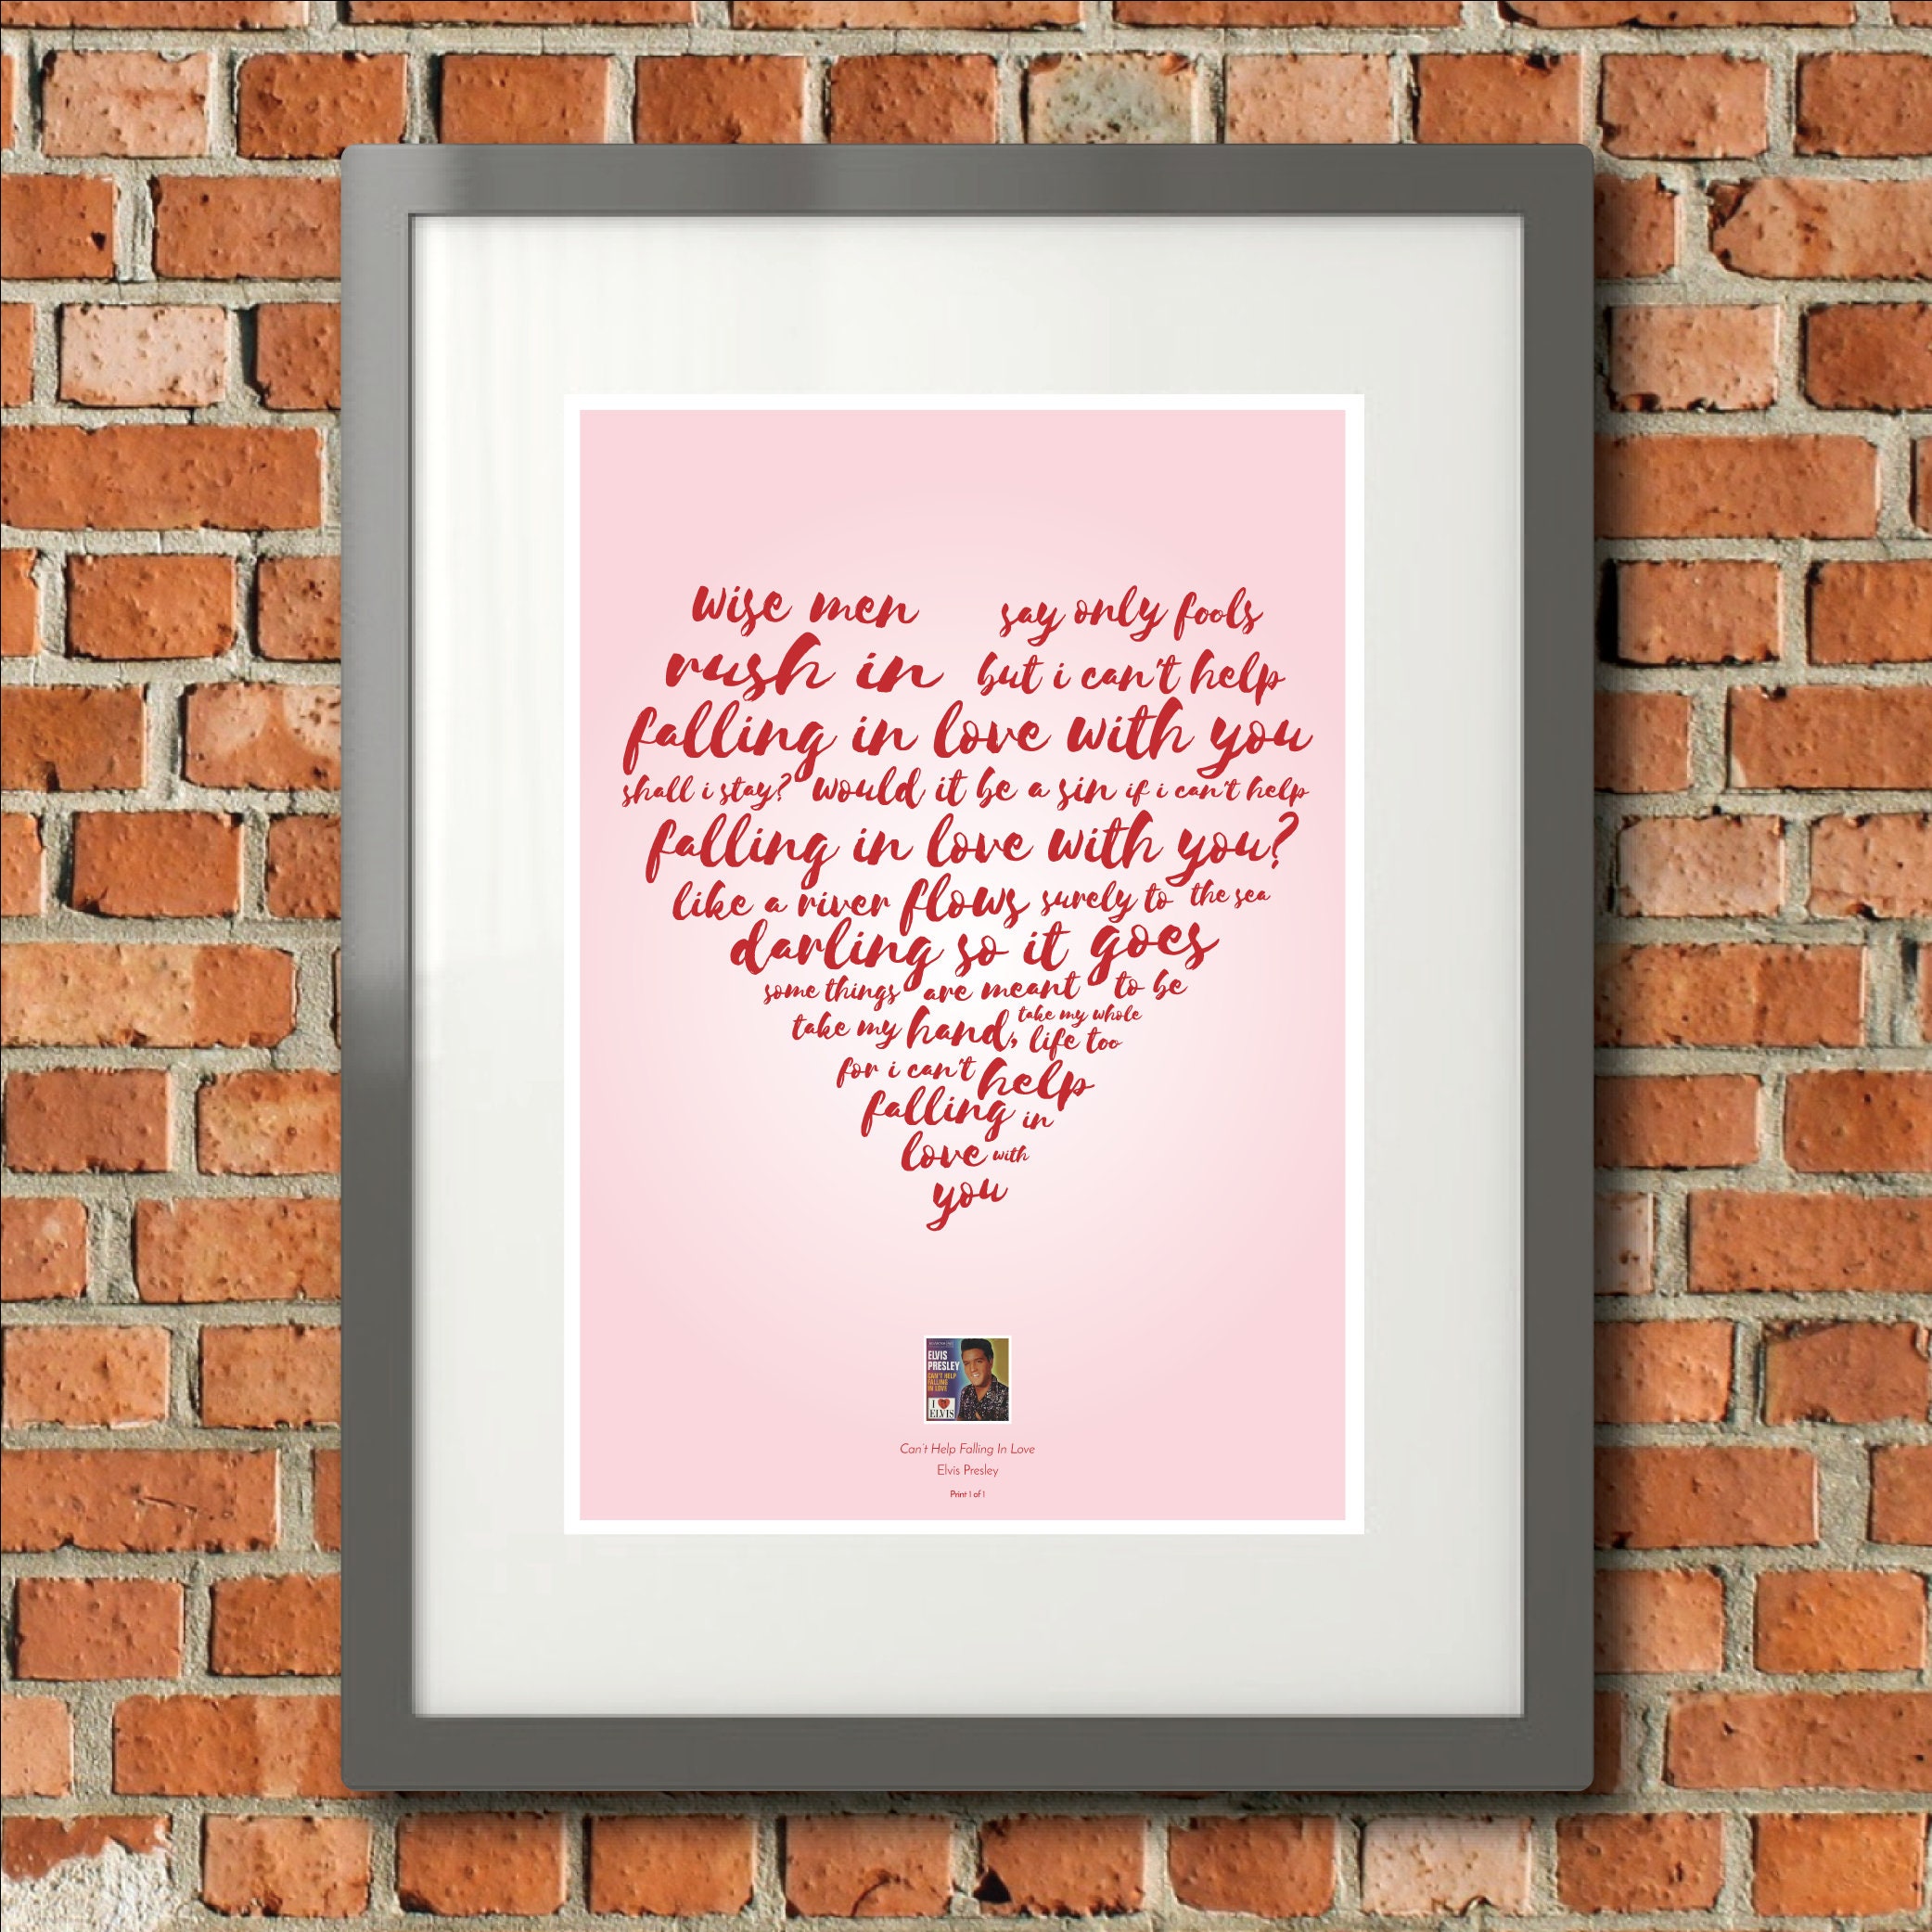 Details about  / Elvis /'Can/'t Help falling In Love/' Personalised Framed Lyrics Print